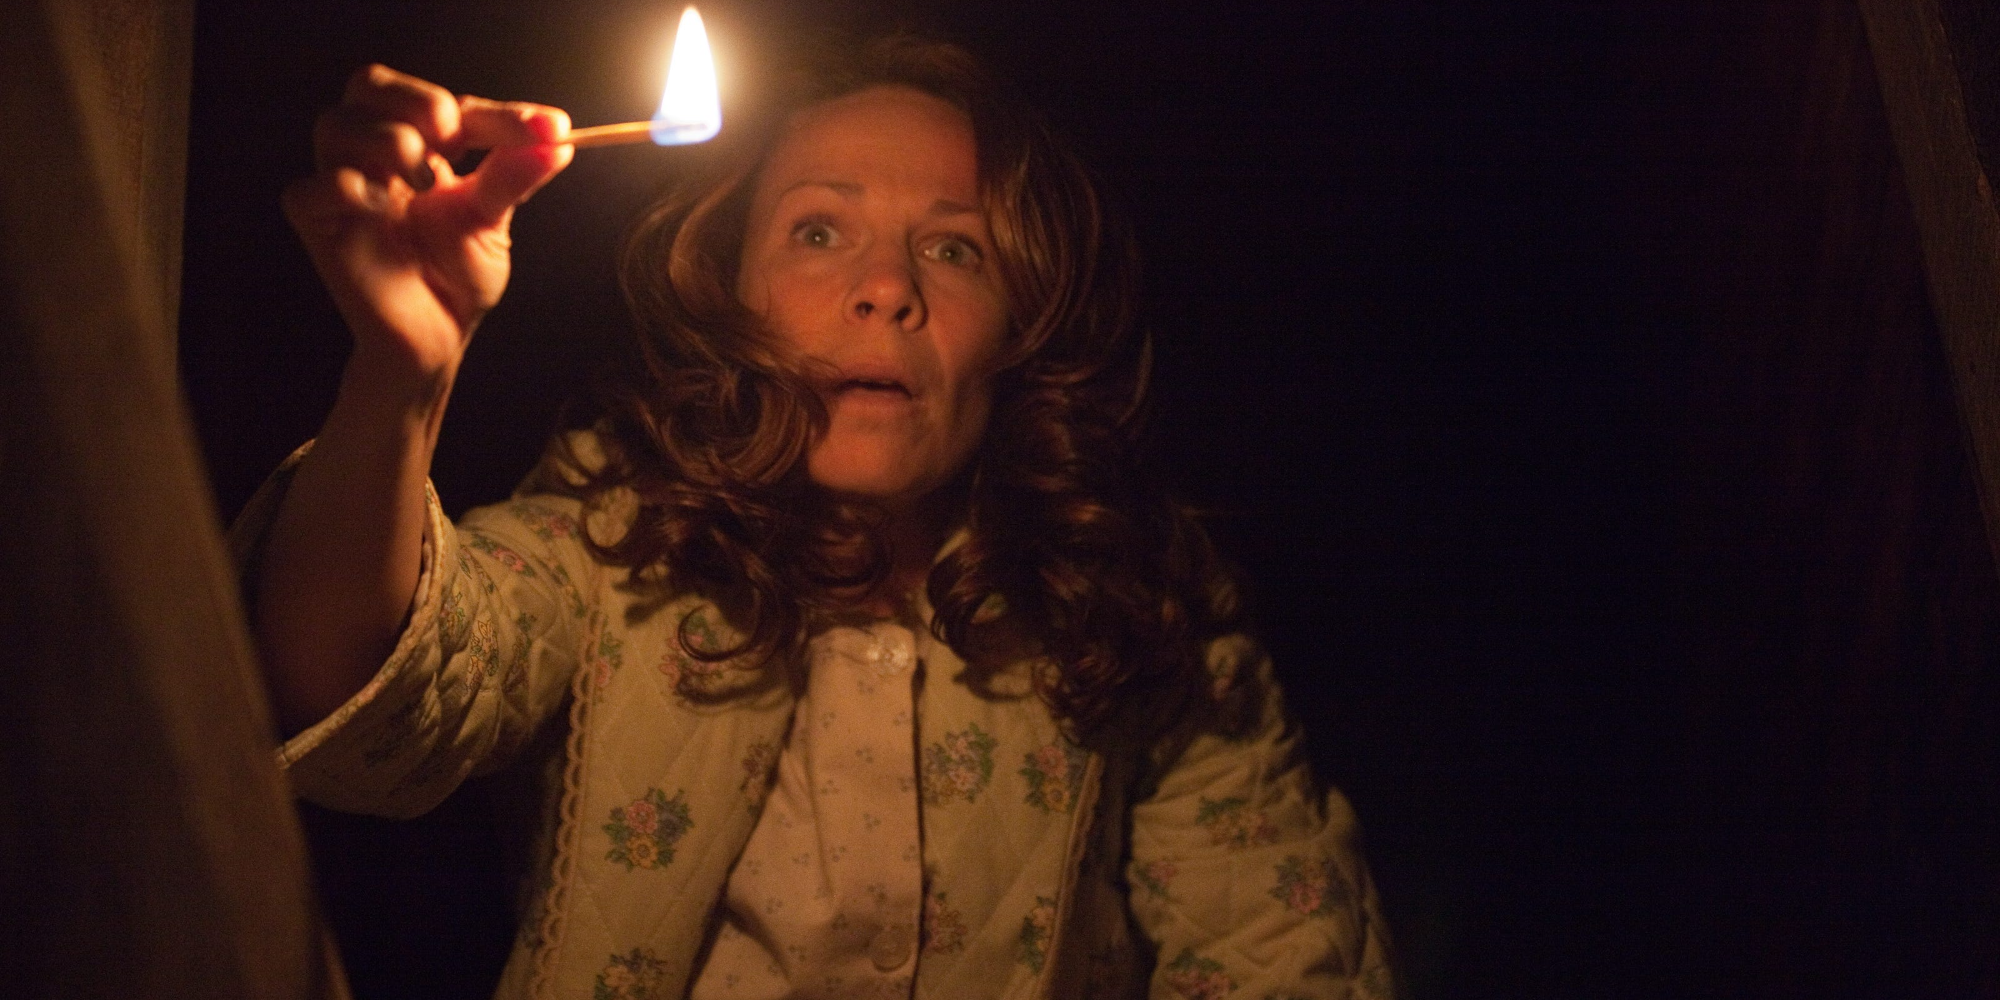 THE-CONJURING--the Perron family plays a game of hide and seek